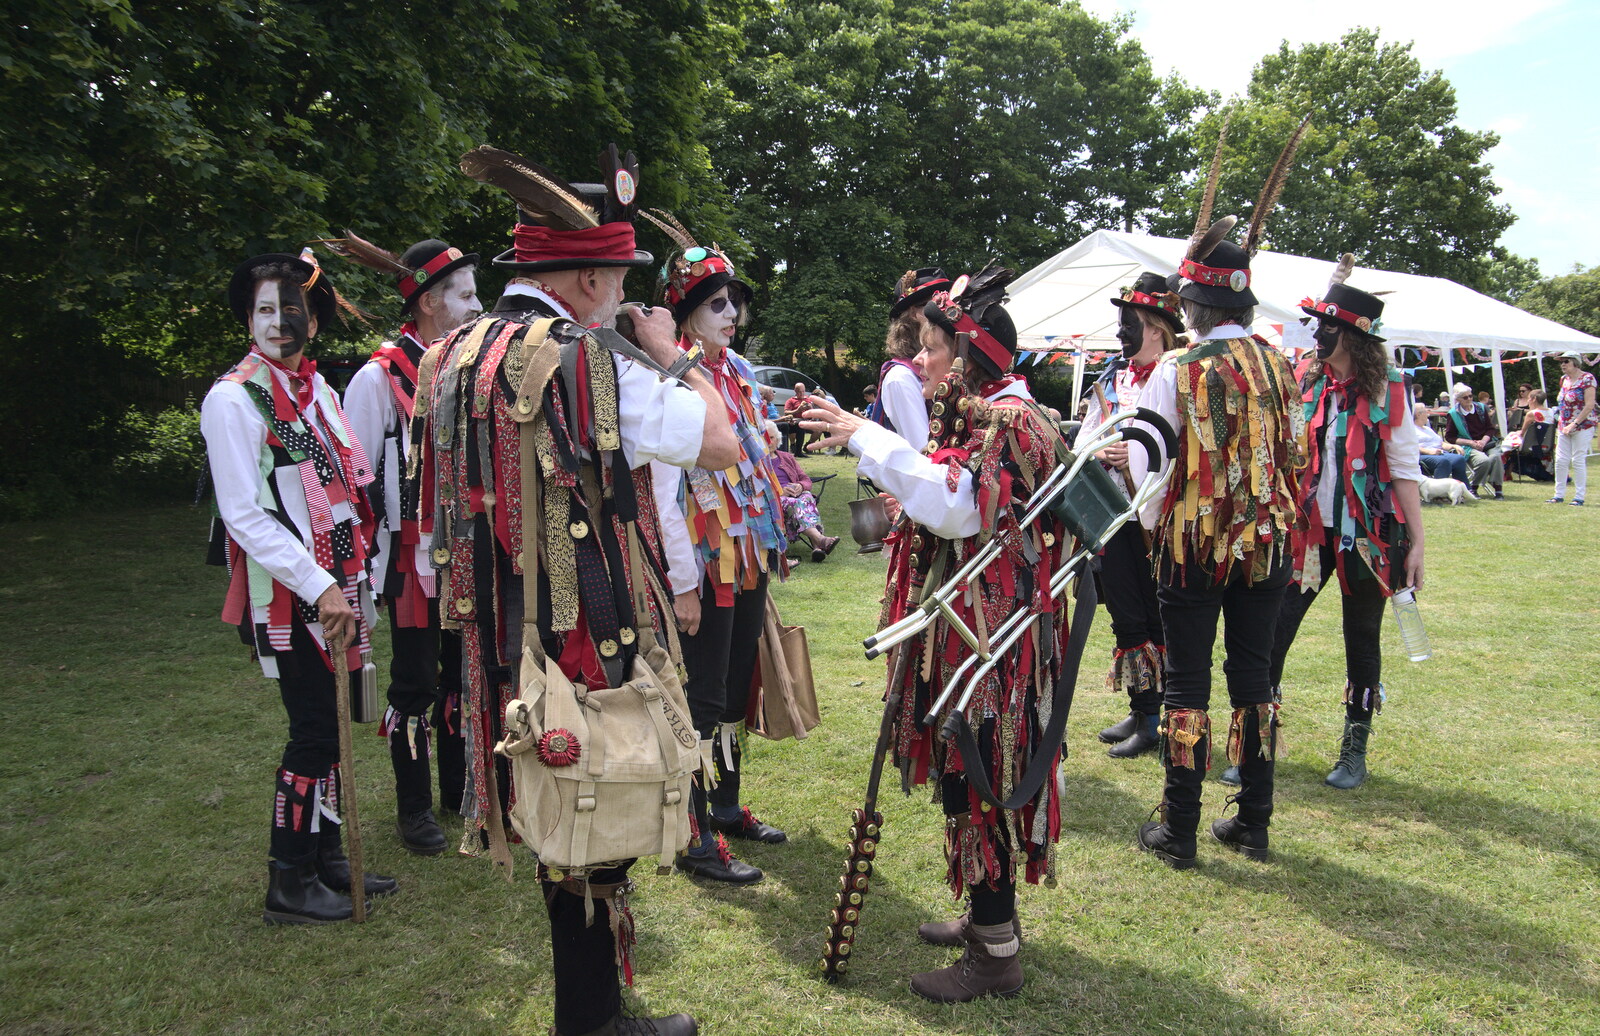 A Morris troupe hangs around from The Gislingham Silver Band at Barningham, Suffolk - 3rd June 2022